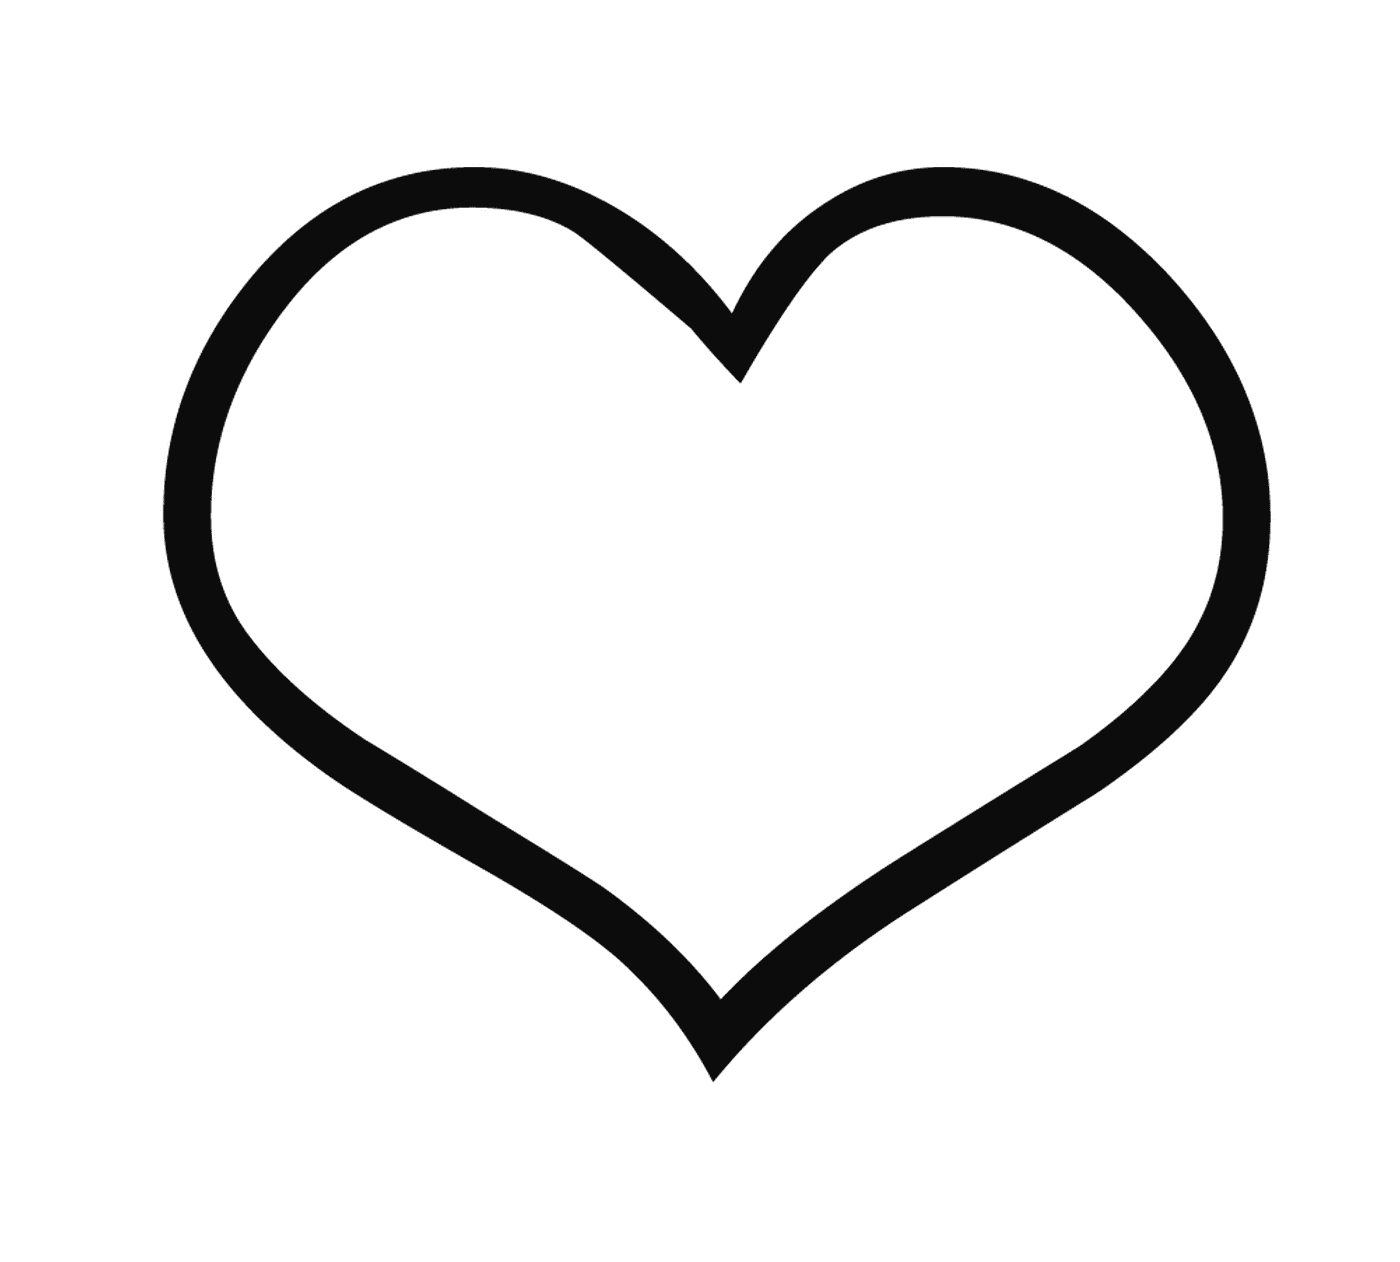  Black and white heart for an artistic style 